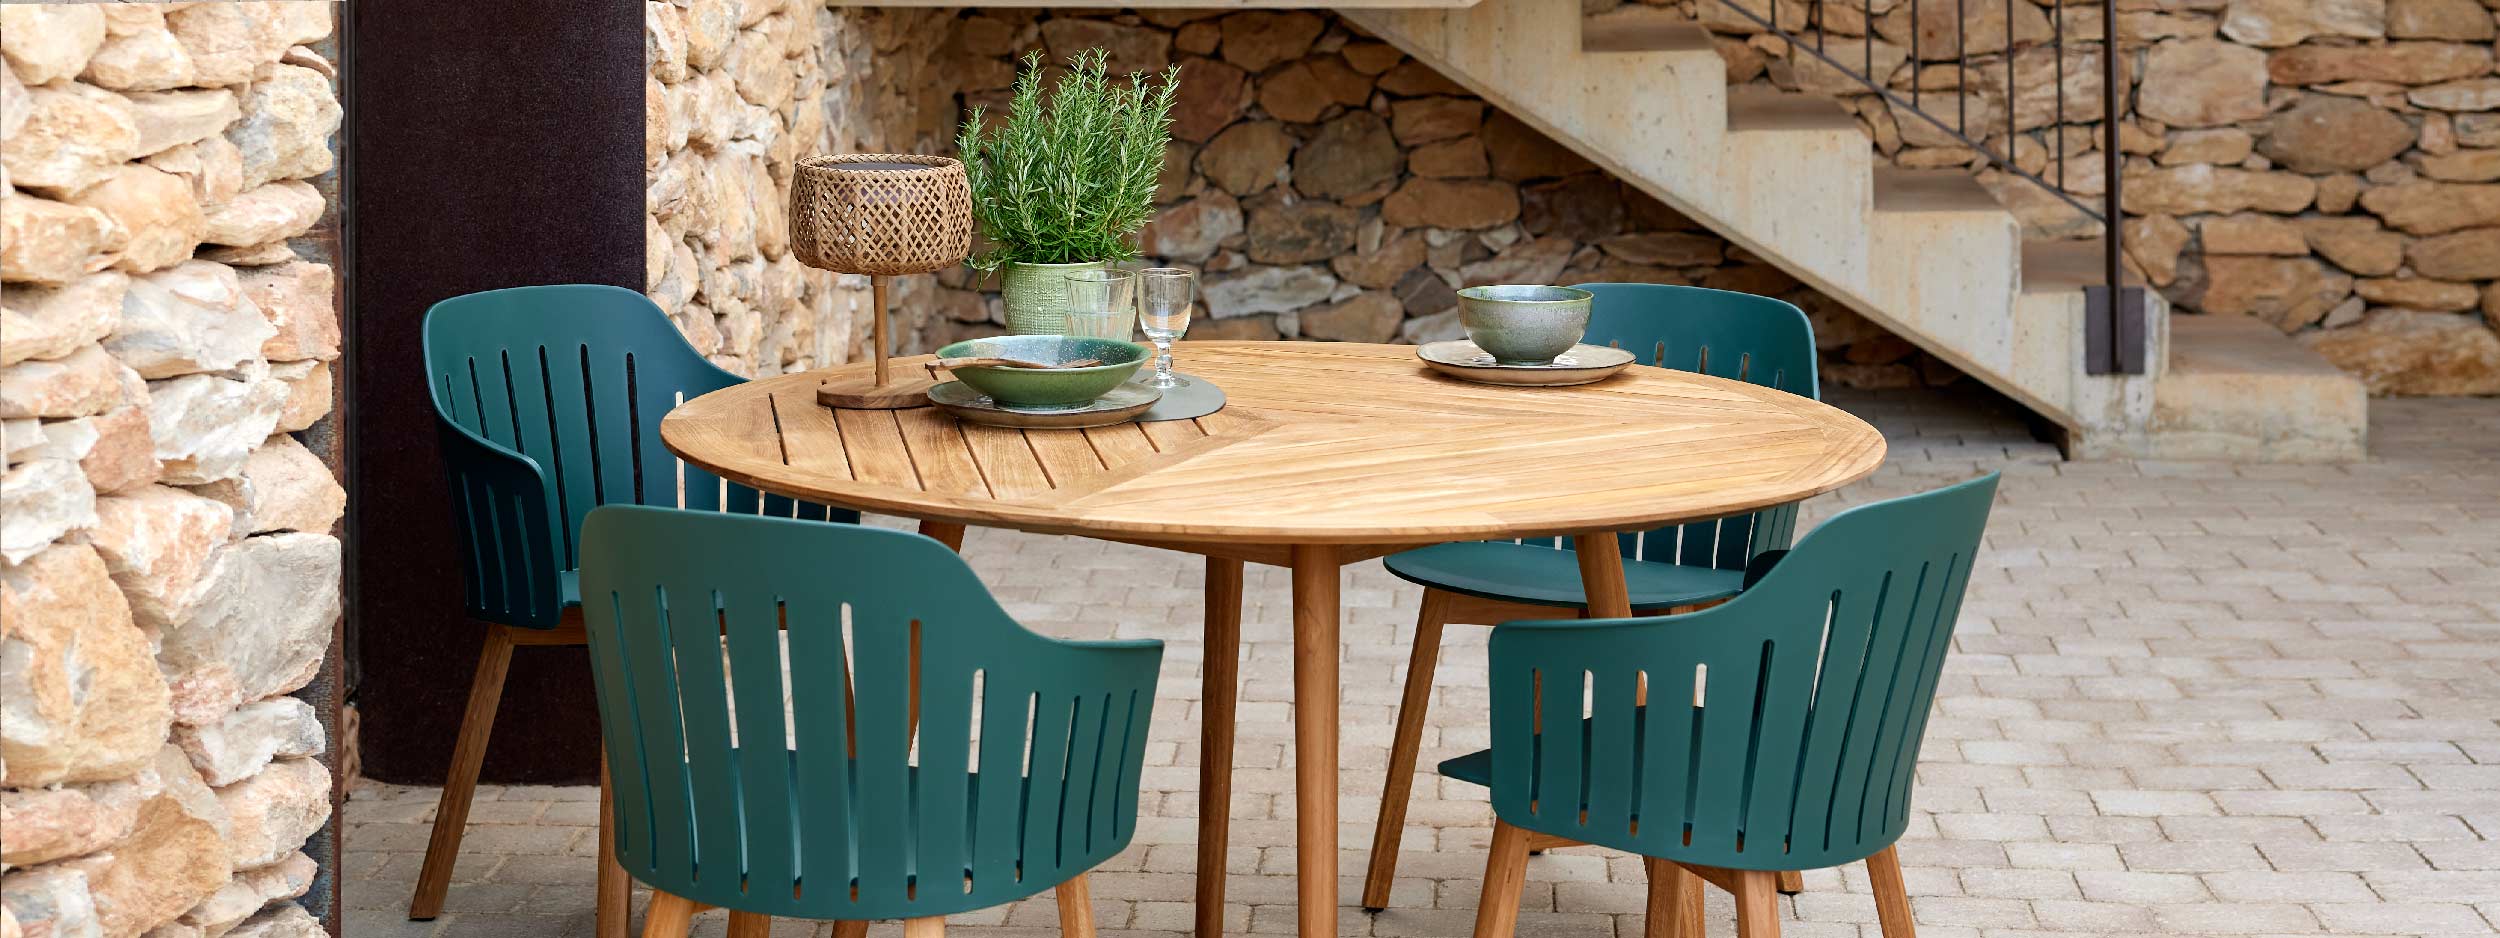 Image of Define contemporary round teak table with geometric design together with Choice recycled plastic garden chairs by Cane-line